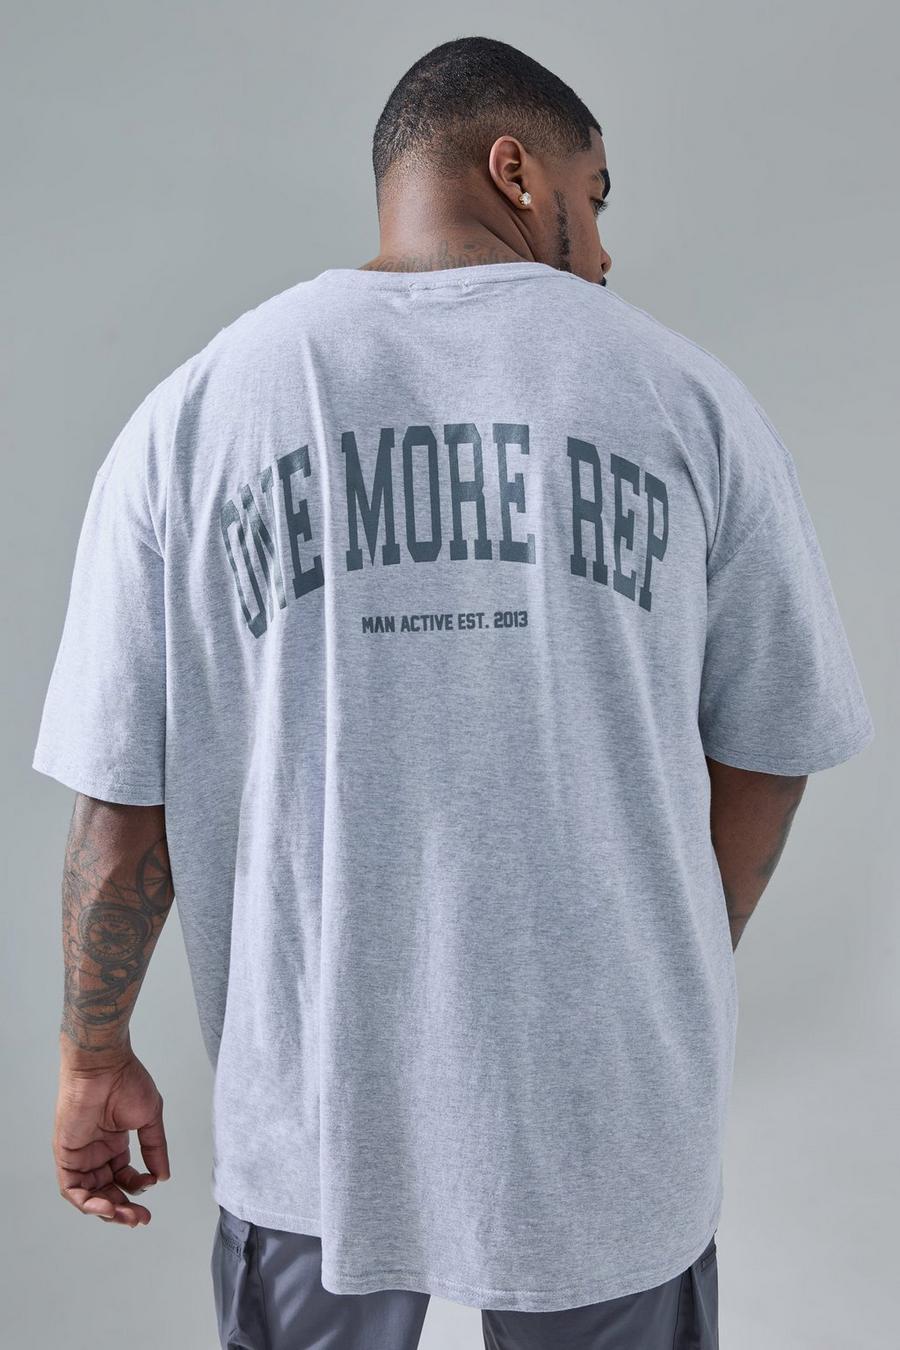 Grey marl Plus Oversized Man Active One More Rep T-Shirt